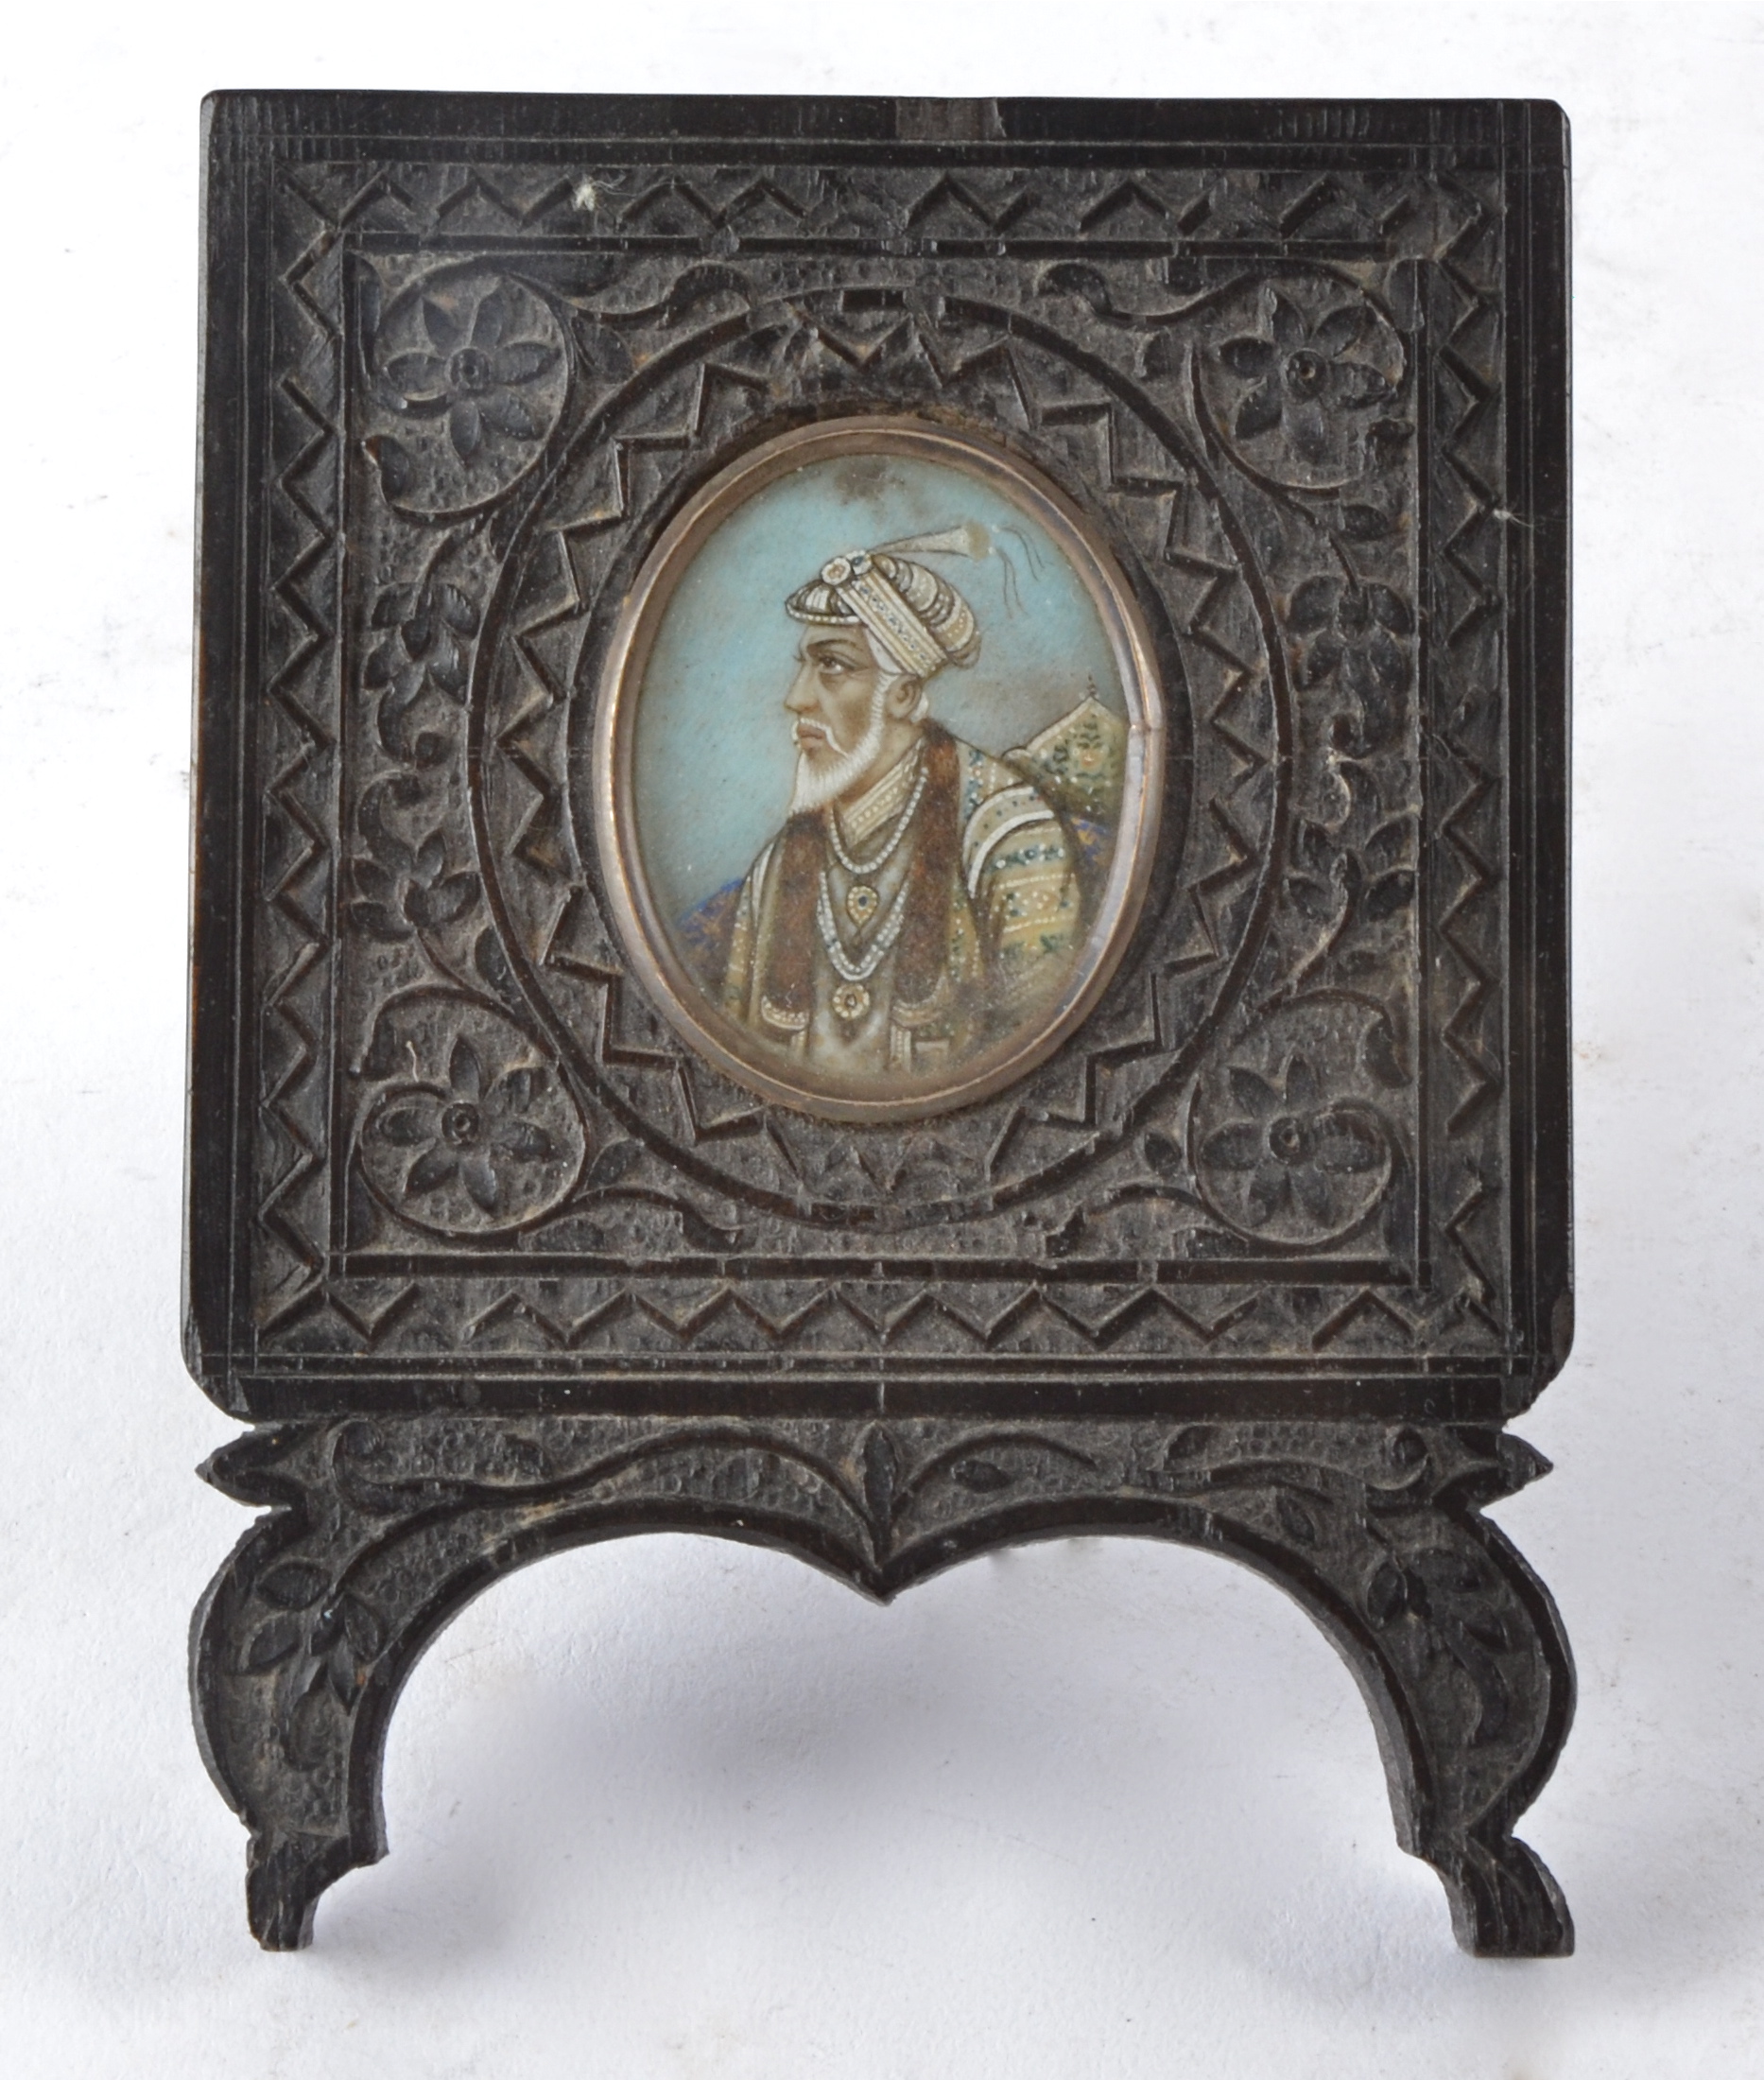 An oval Indian miniature portrait painting, encased in a profusely carved ebonised surround, 11cm - Image 3 of 3